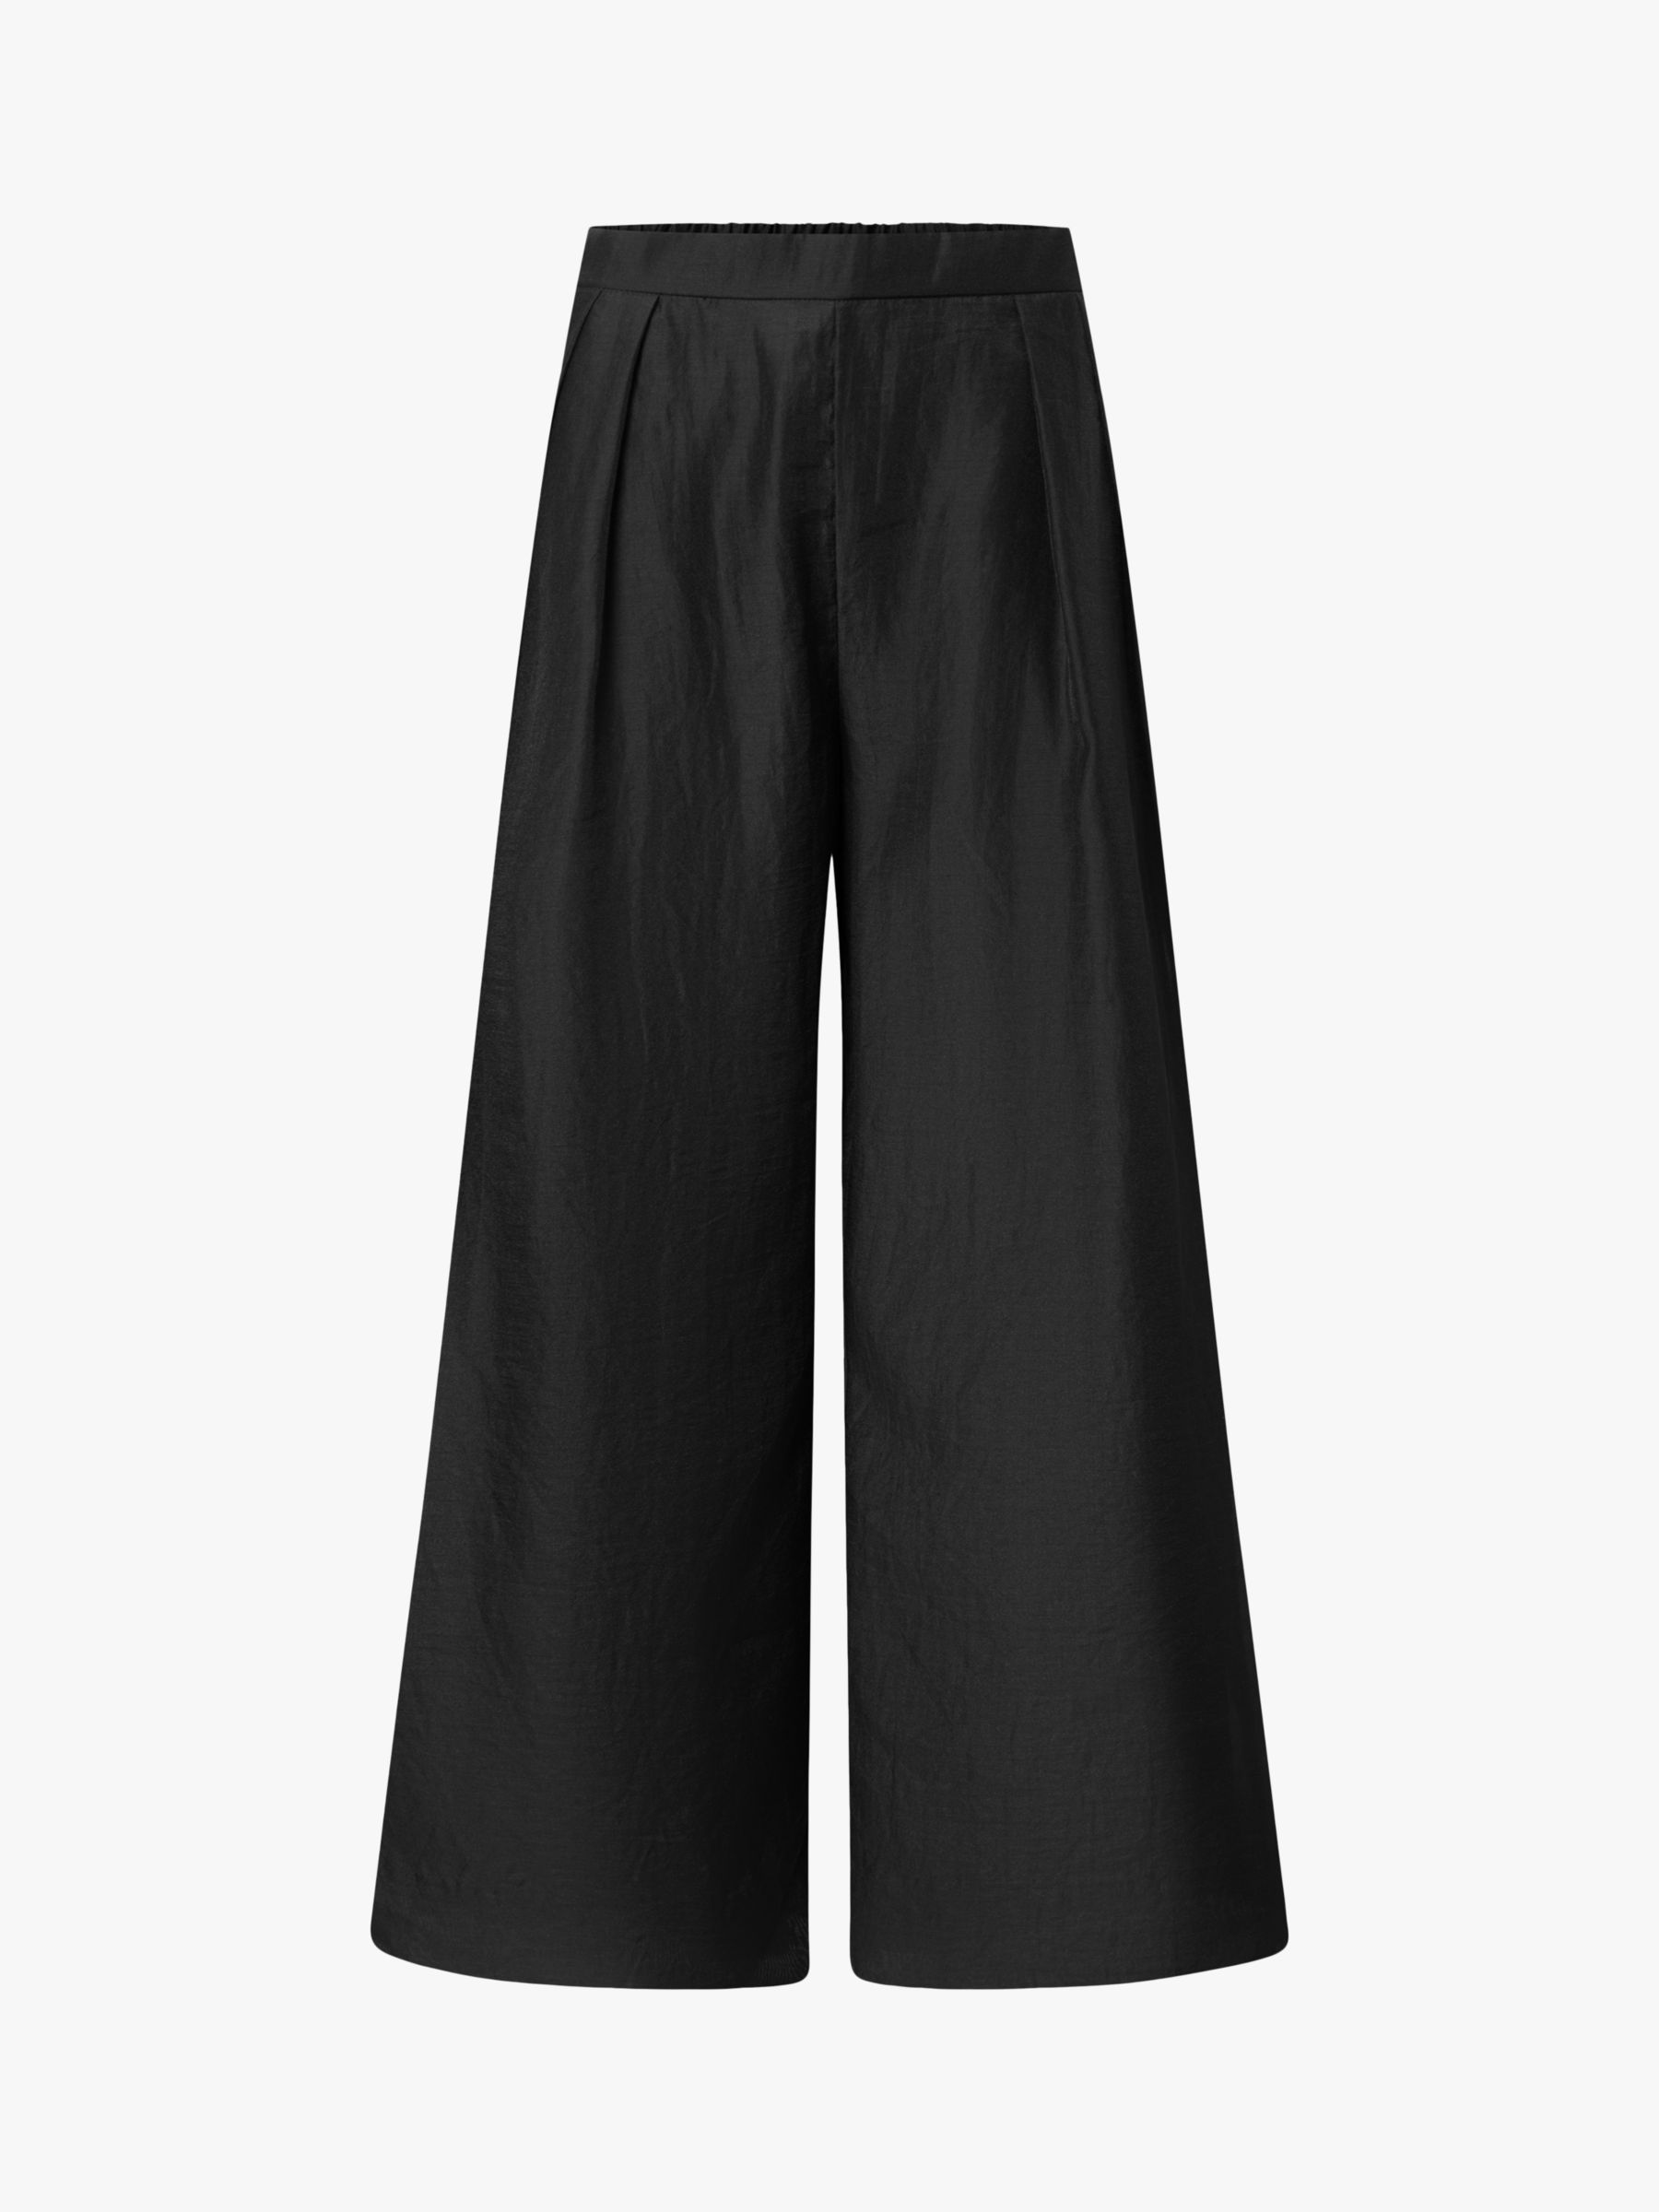 Buy Lovechild 1979 Mary-Anne Wide Leg Trousers, Black Online at johnlewis.com